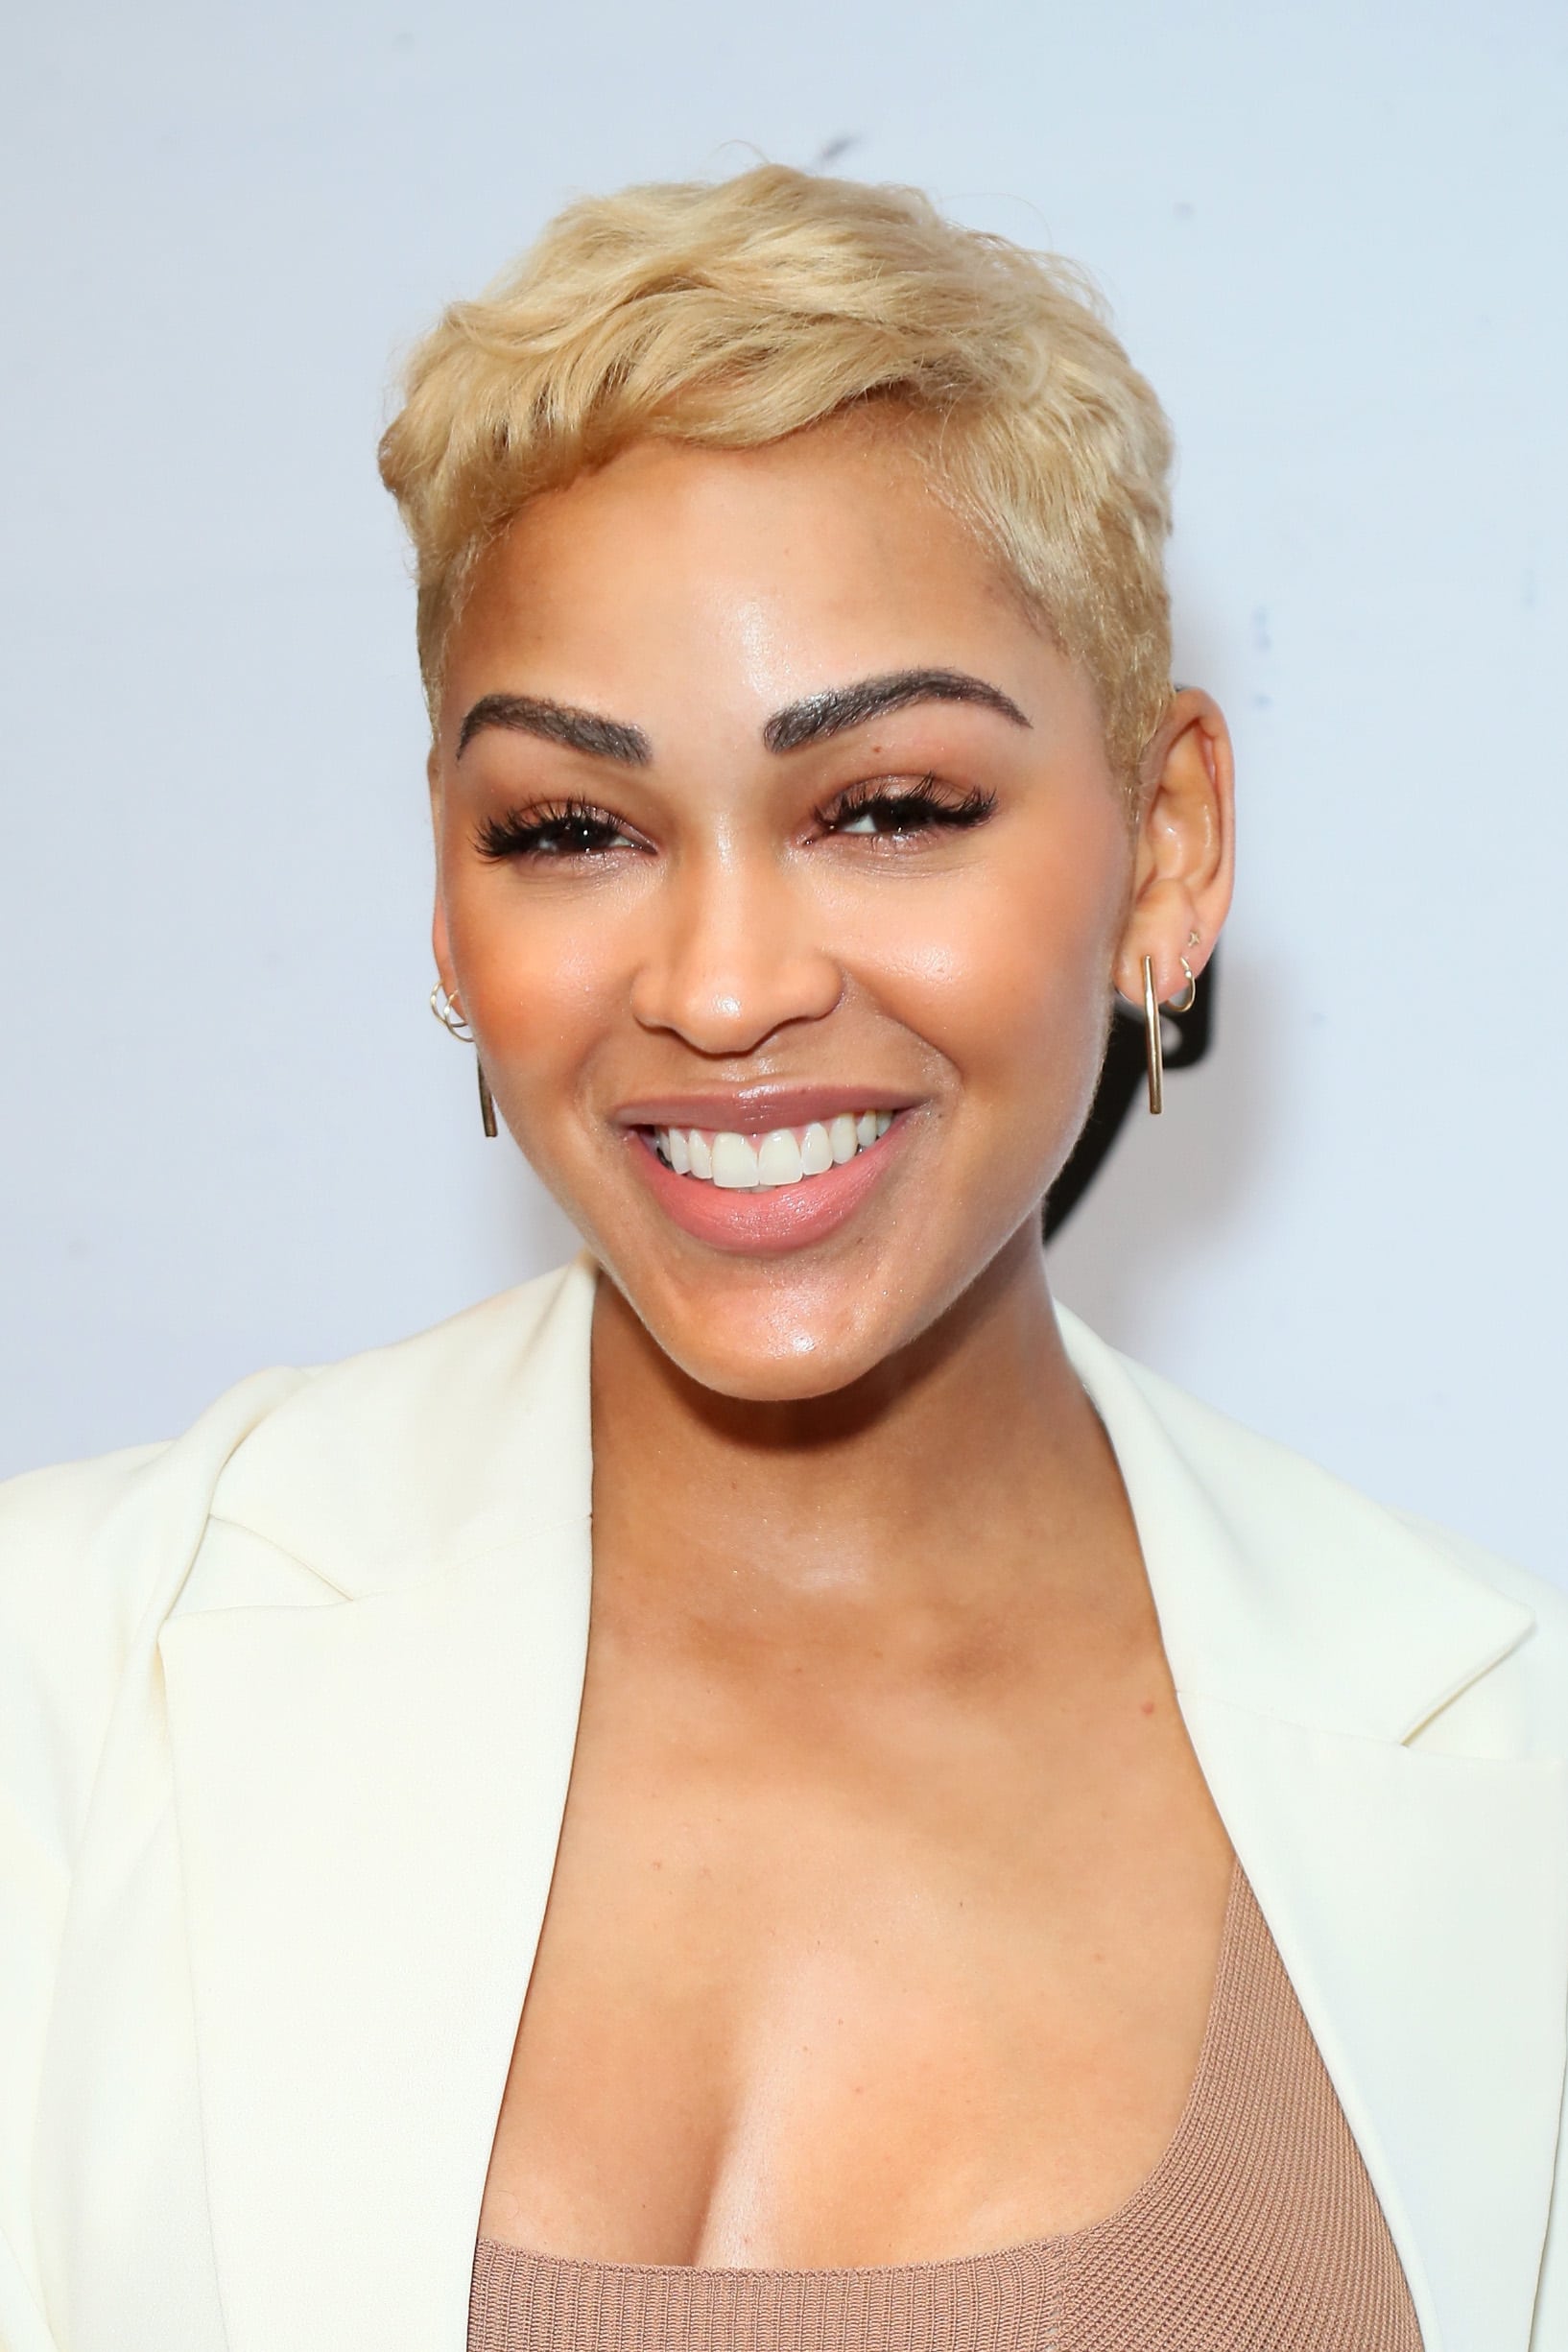 Tati Gabrielle's Best Hairstyle Moments: Pixie Cuts, Braids, & More